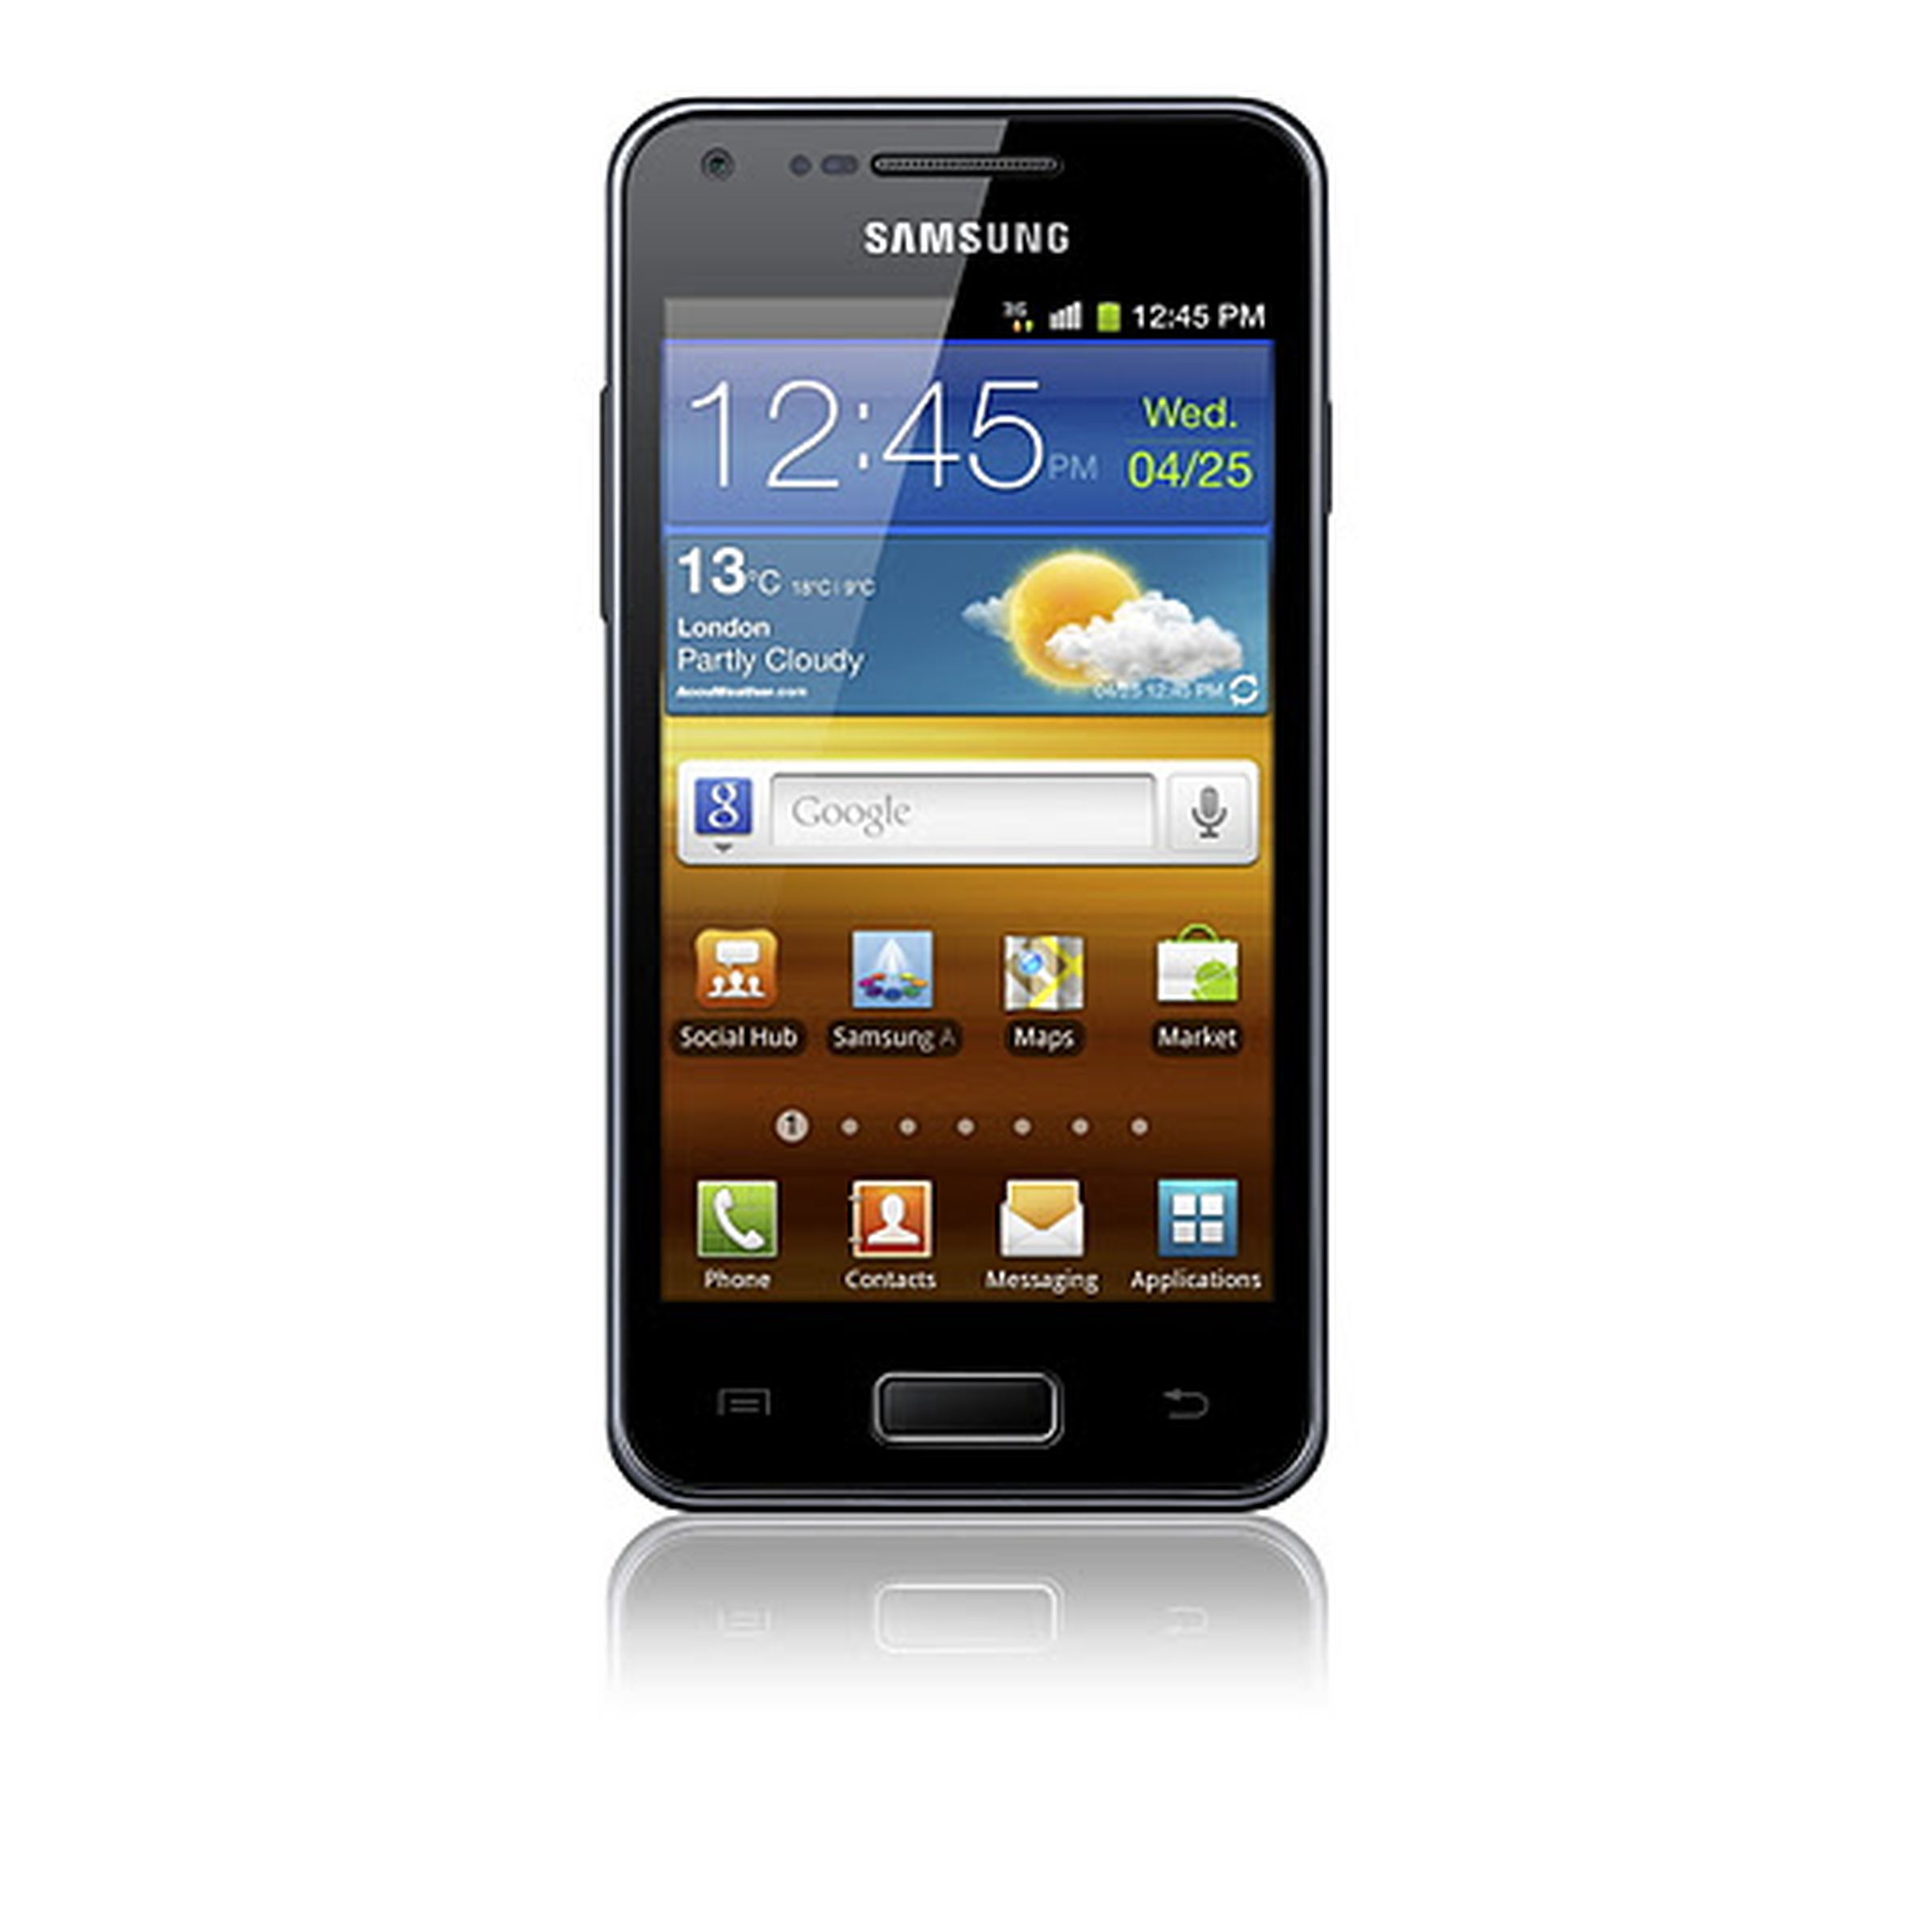 Galaxy S Advance product images